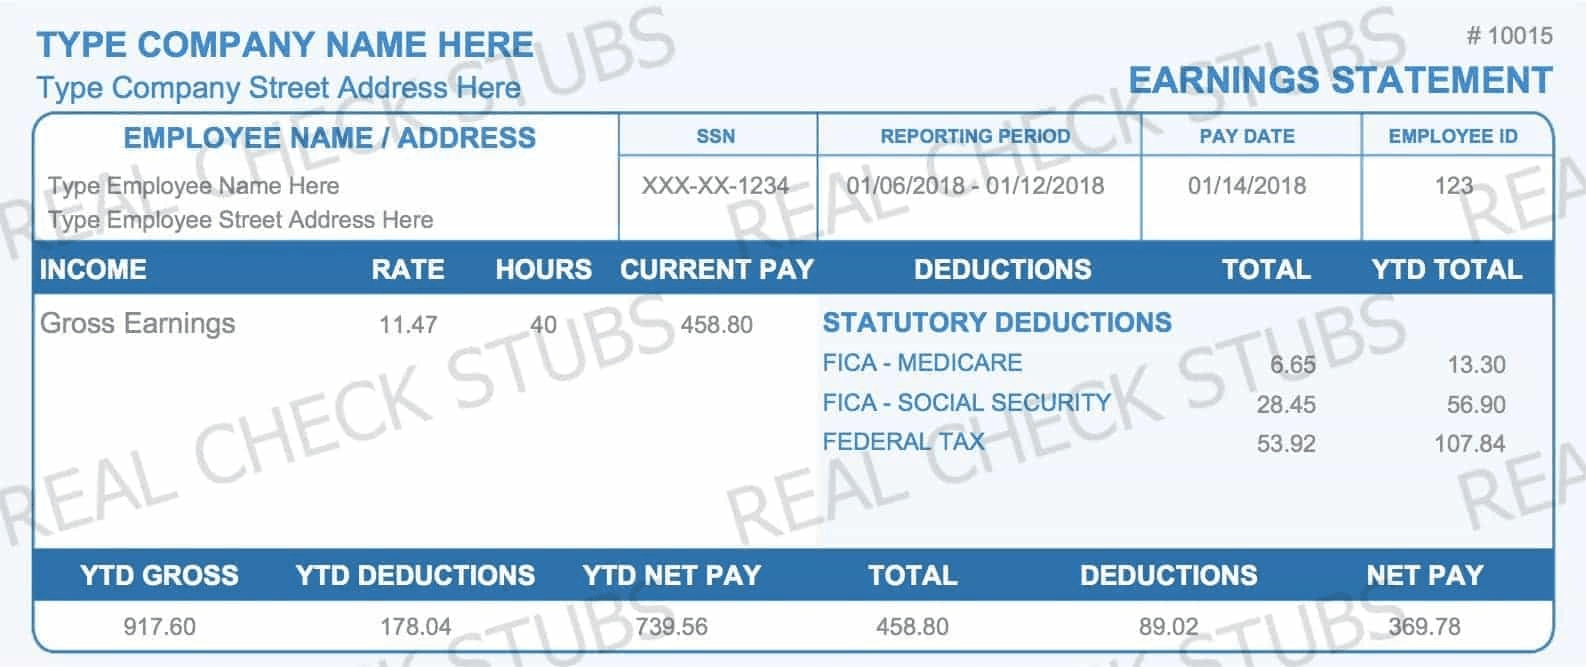 How To Calculate Adjusted Gross Income From Pay Stub